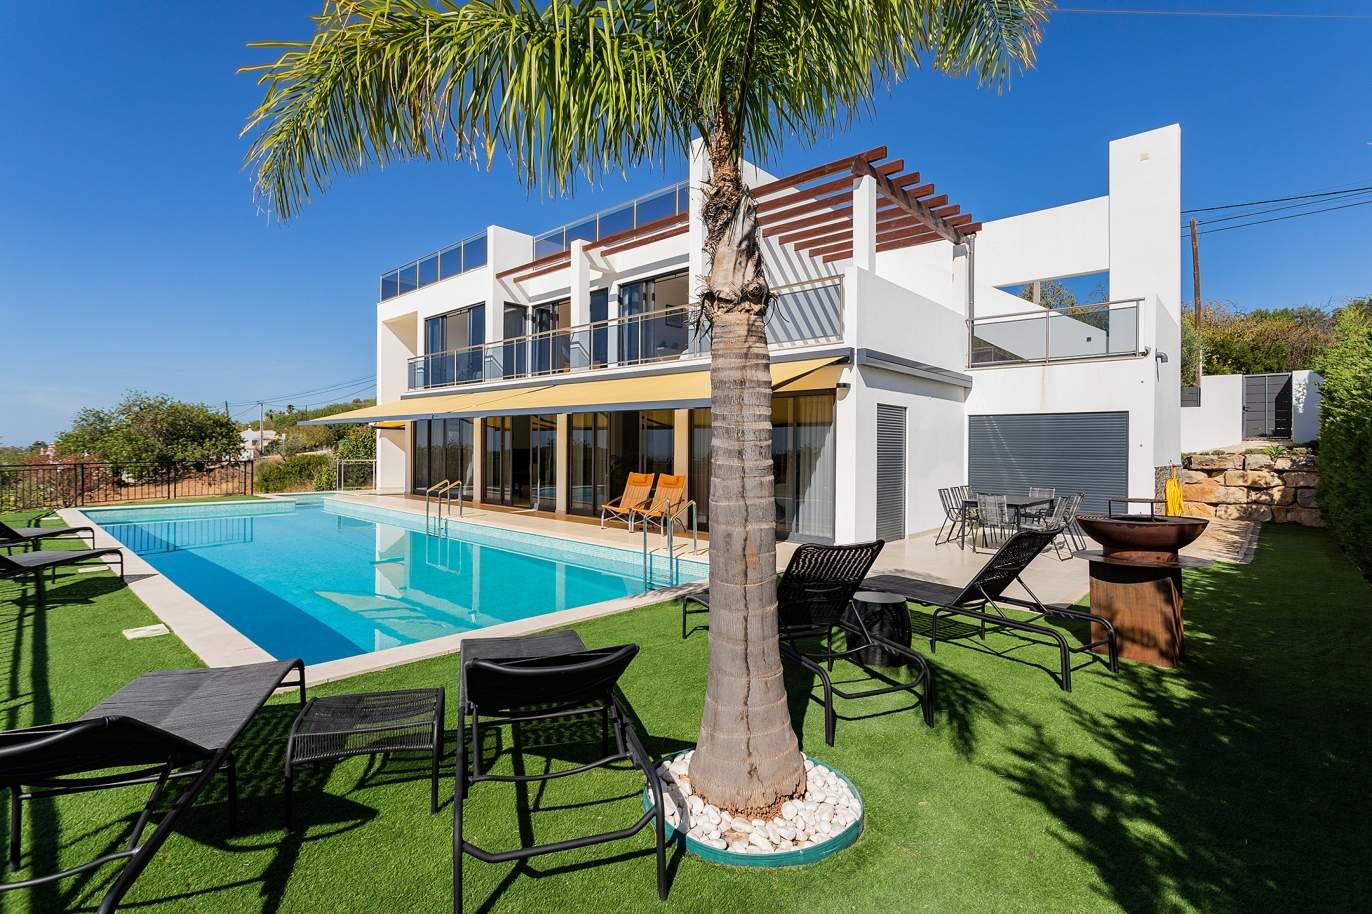 New Villa with 4 bedrooms, sea and mountain view, Loulé, Algarve_179029